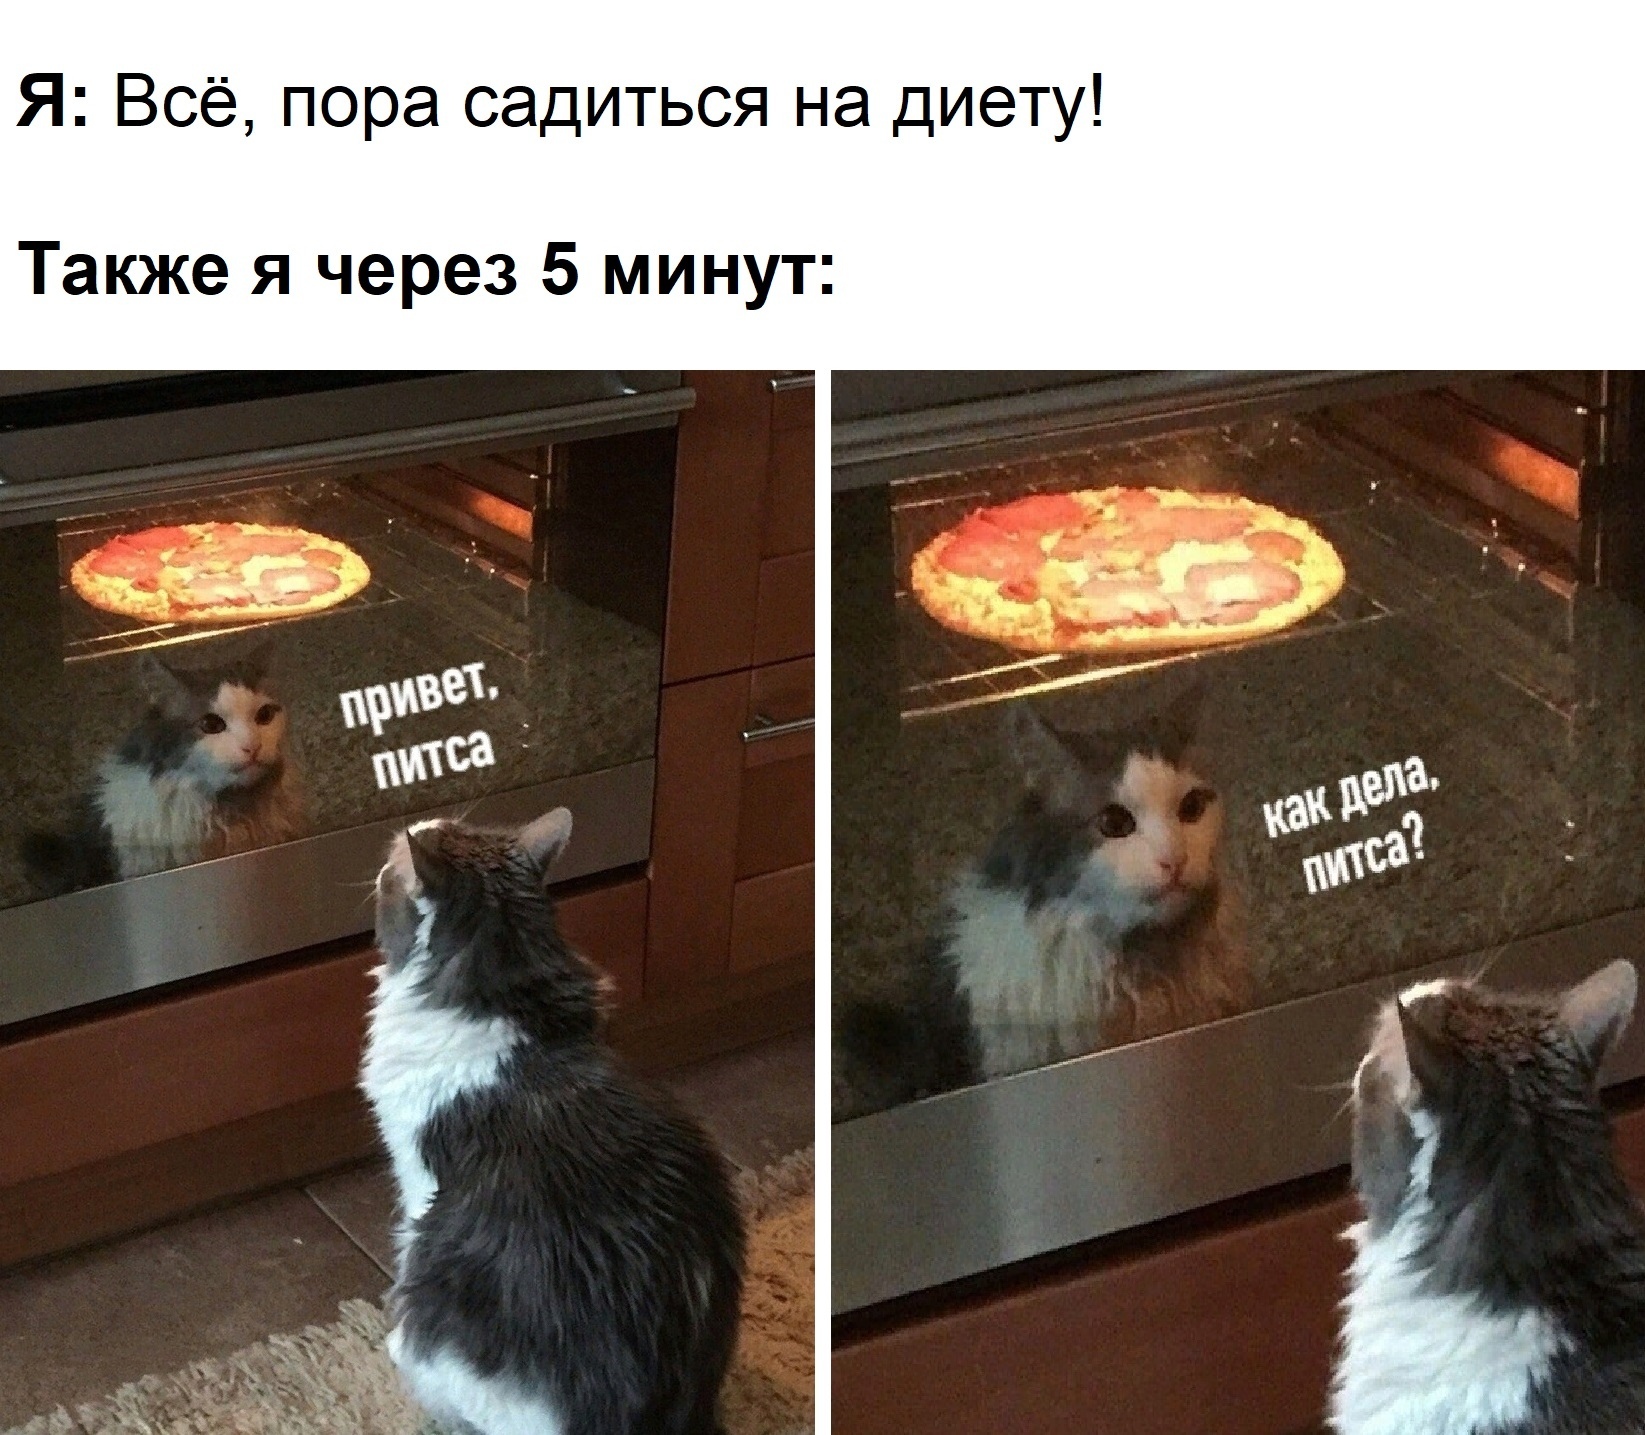 And so every time - Food, Picture with text, cat, Diet